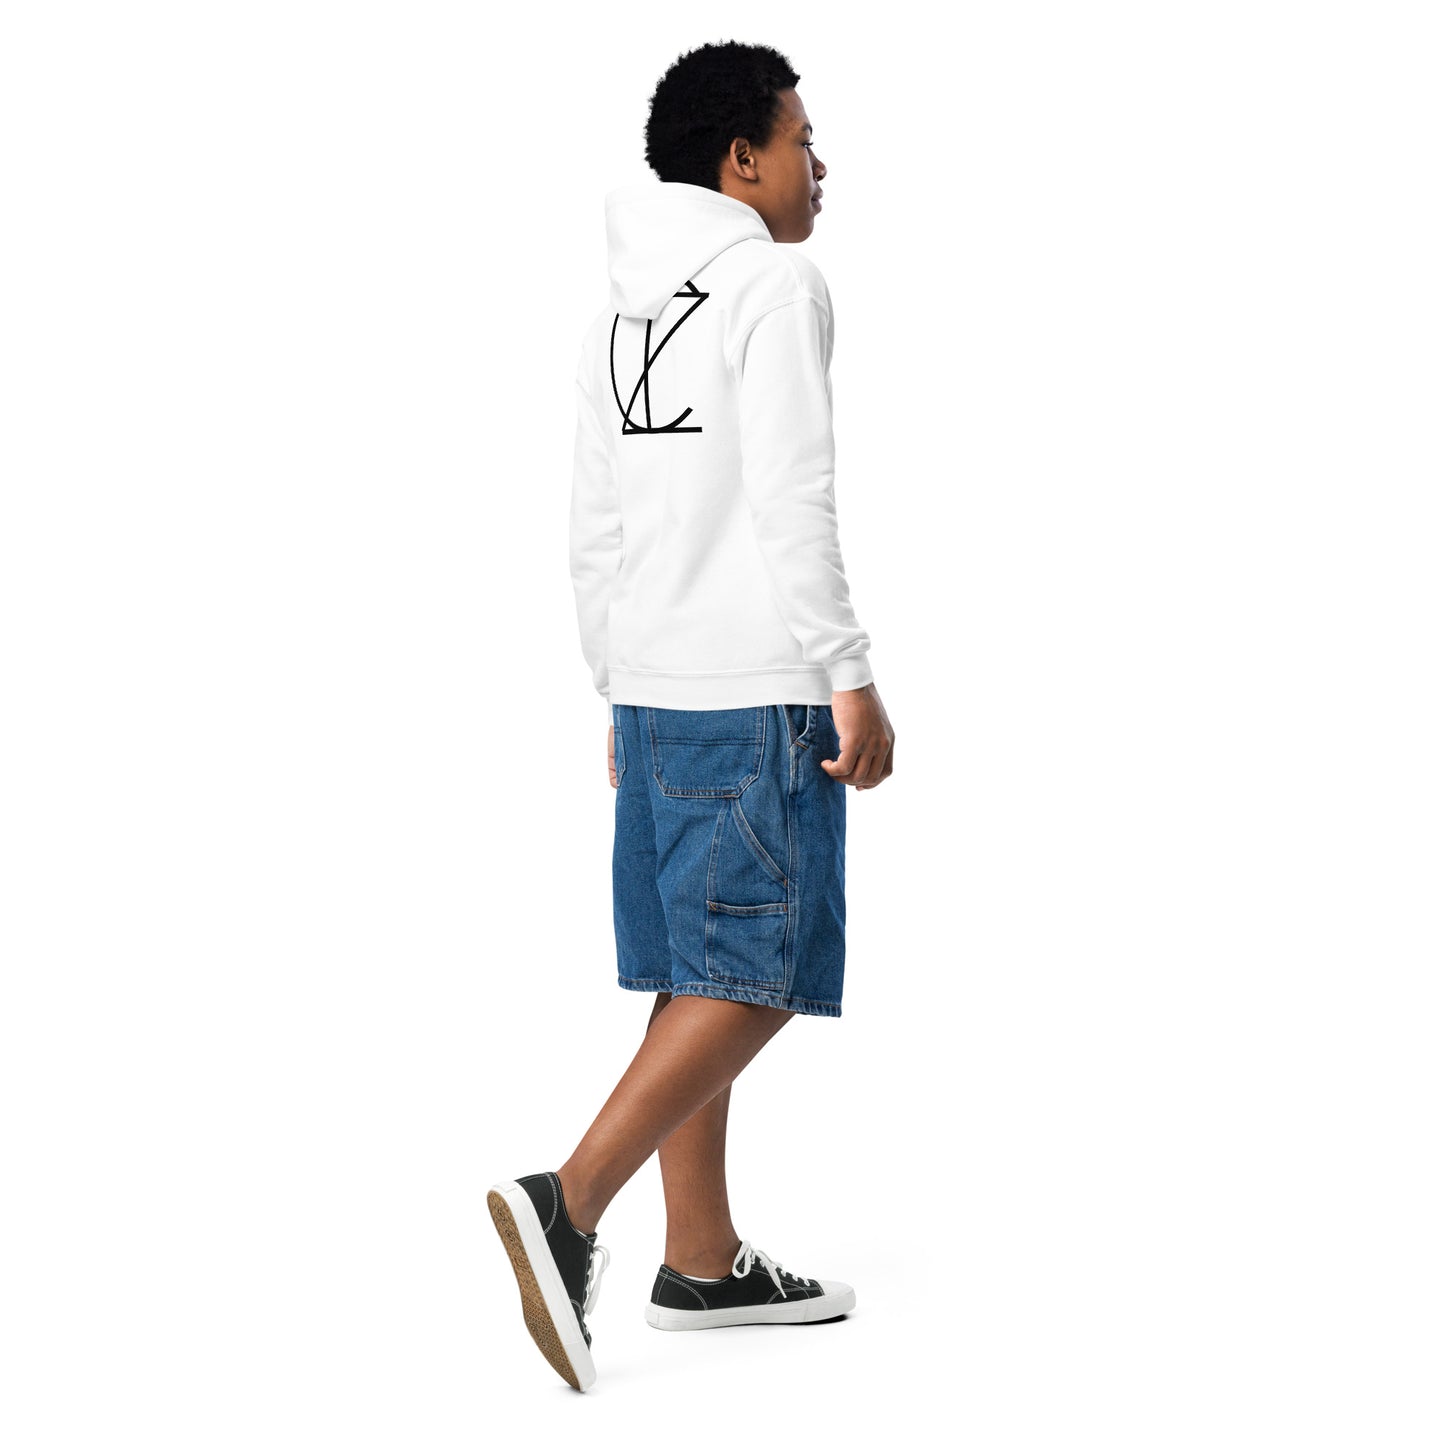 ChatZZ Youth Heavy Blend Hoodie